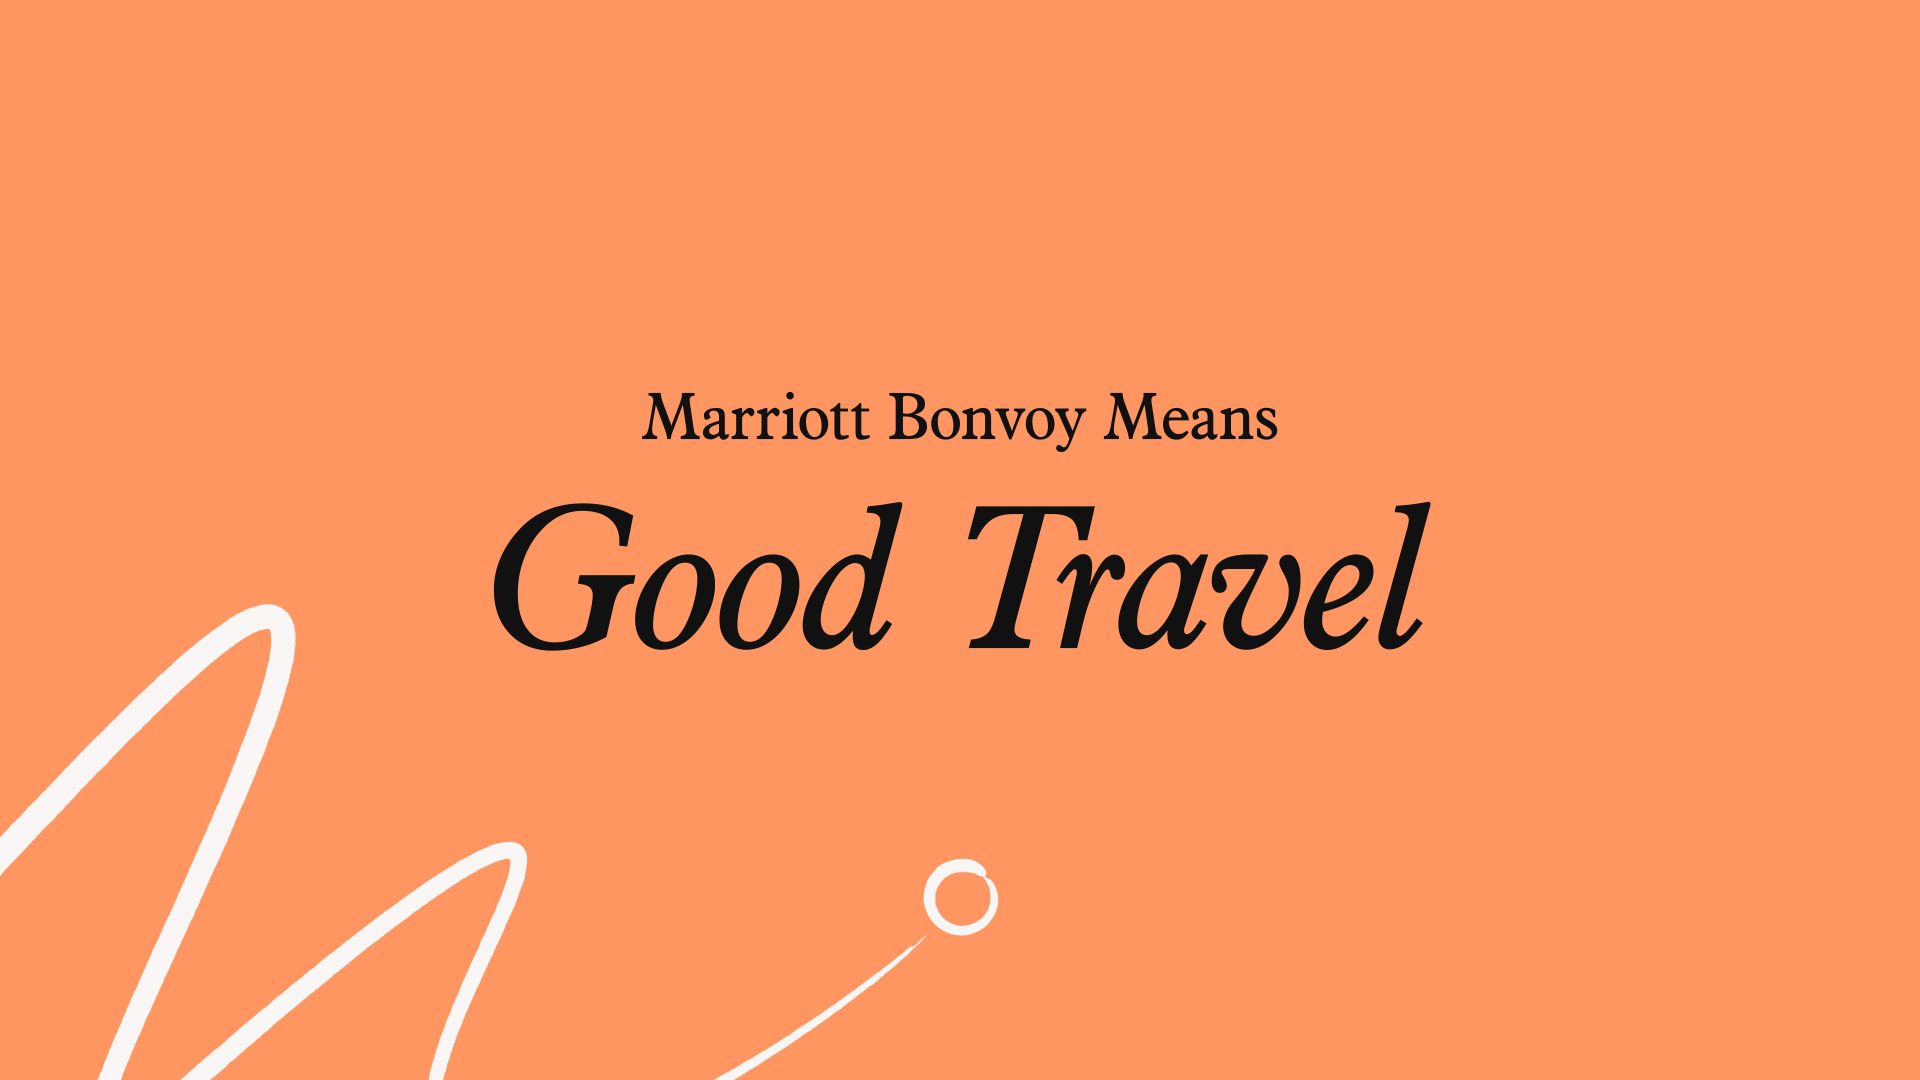 Marriott Bonvoy® Credit Cards from Chase